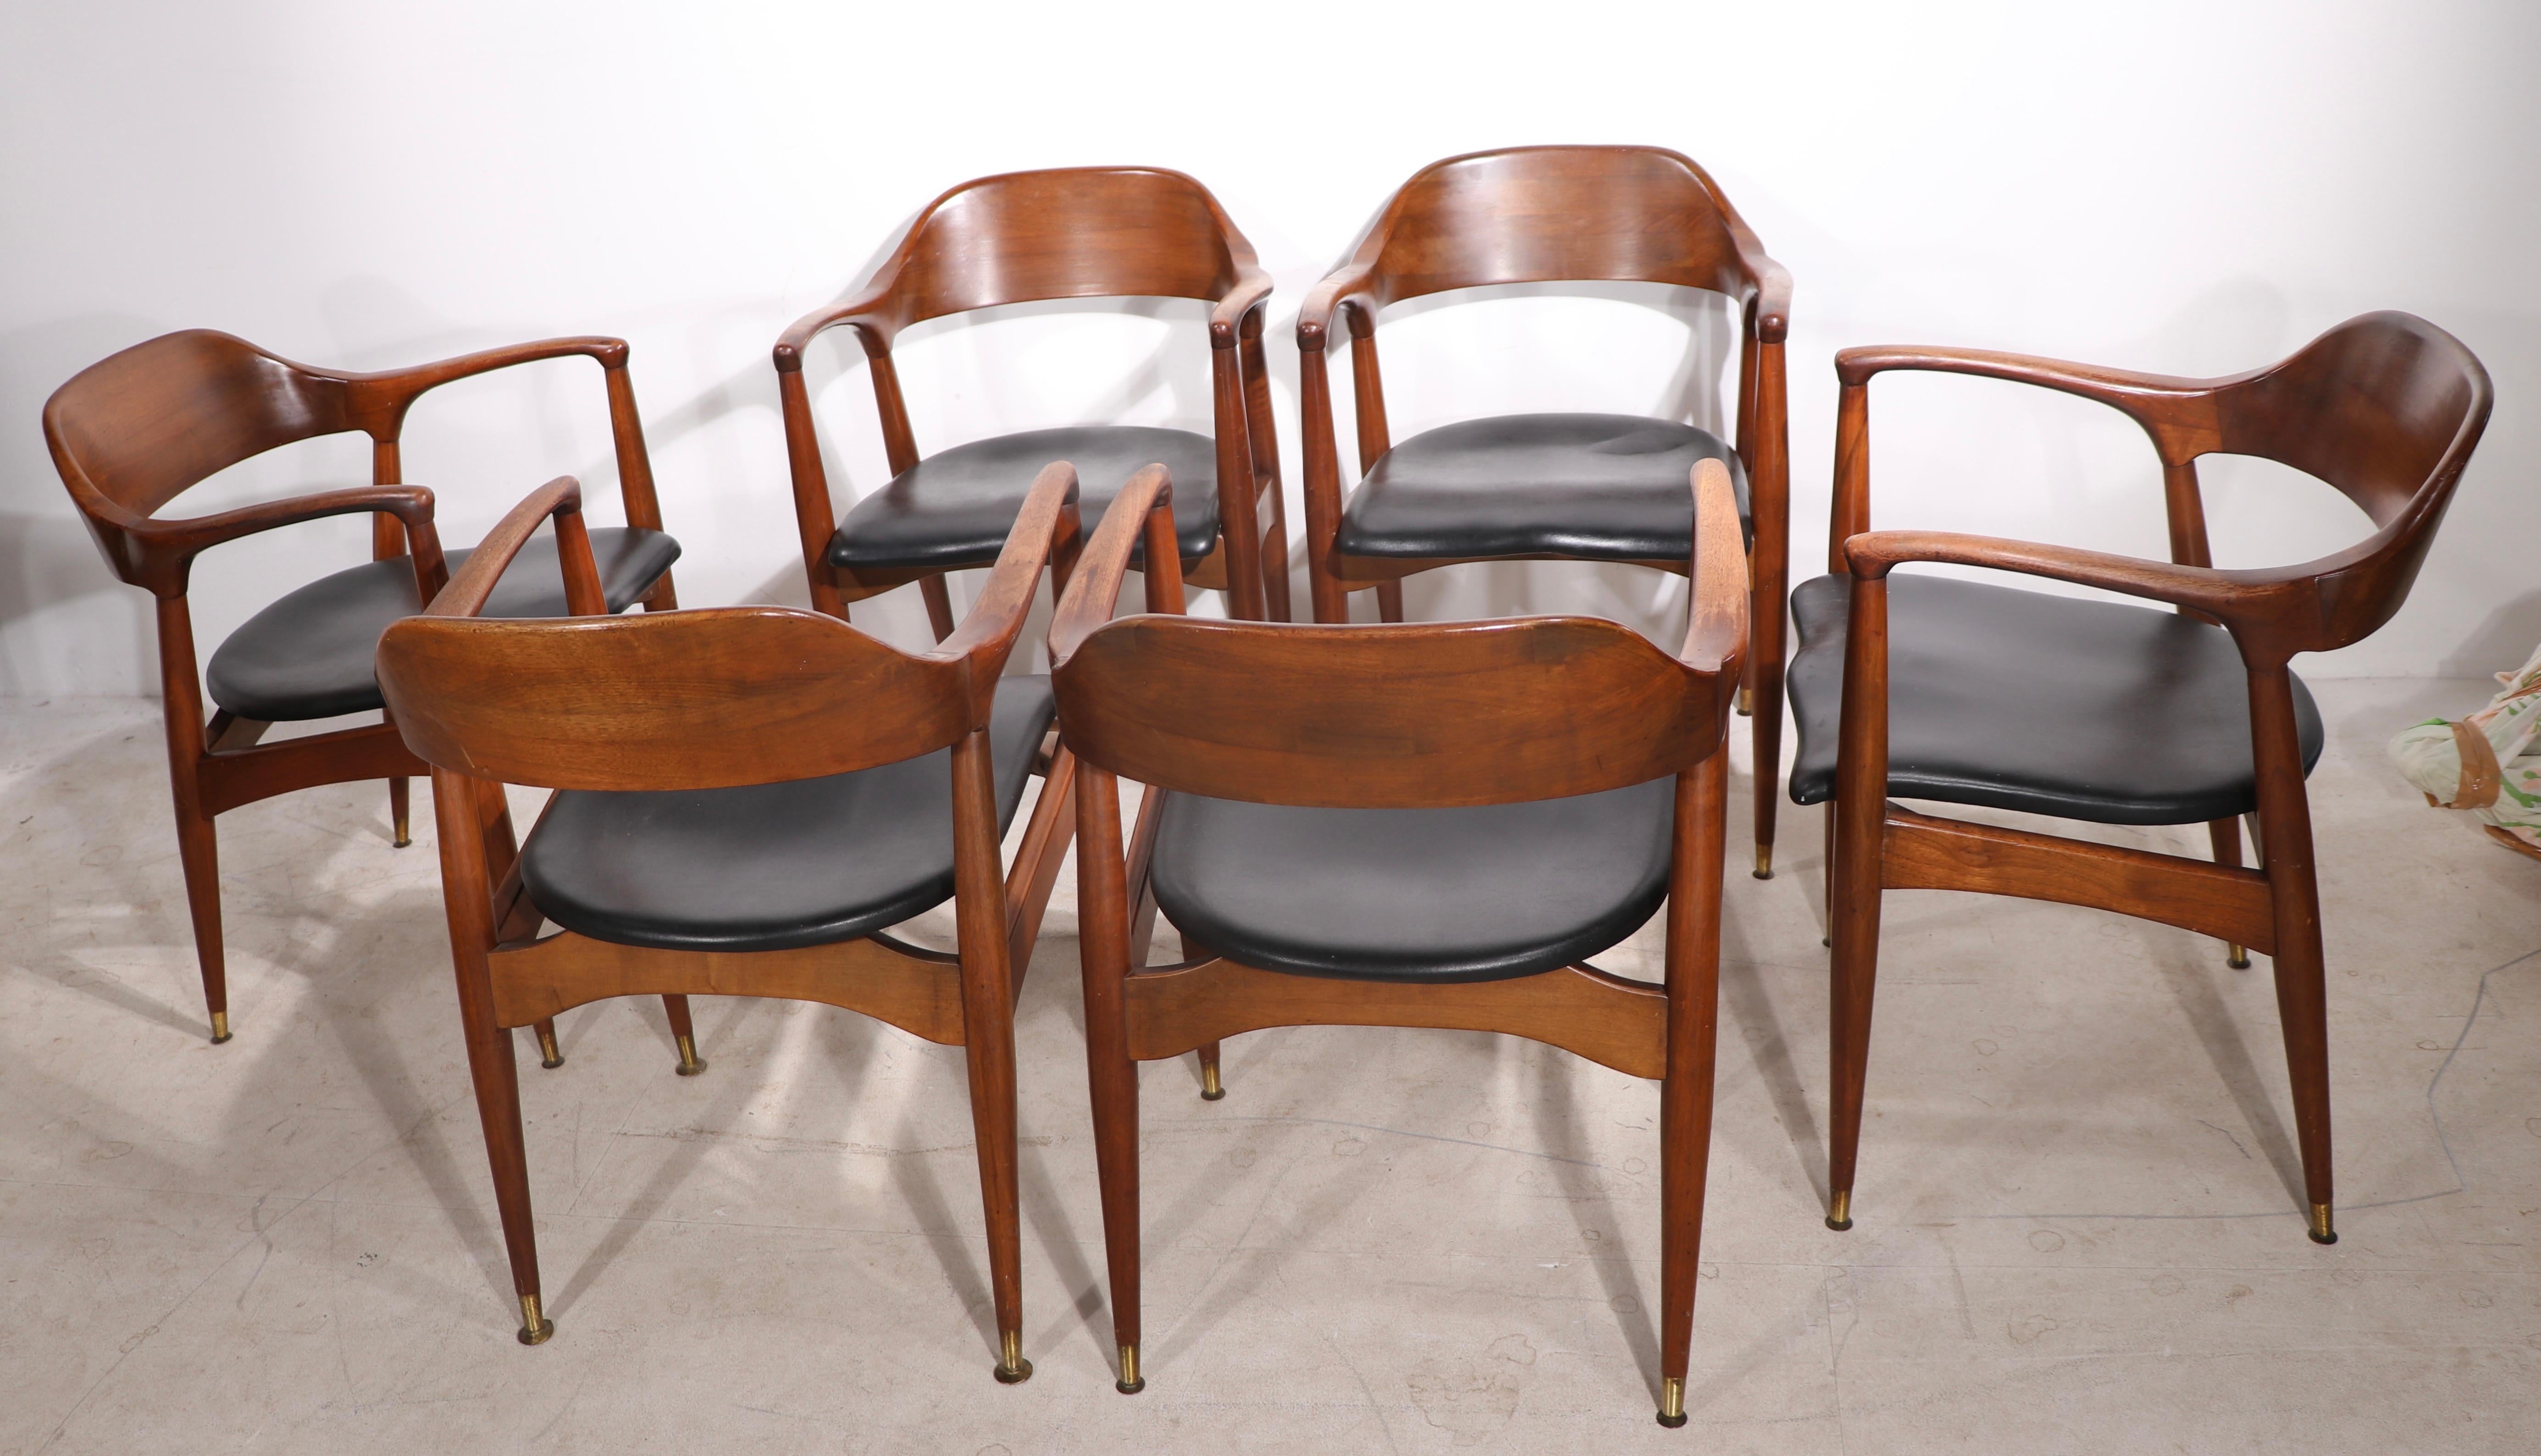 Rare opportunity to purchase a complete original set of six dining, arm chairs by Jack Van Der Molen for the Jamestown Lounge Company. The chairs exhibit sculptural sophistication, while still feeling down to earth not pretentious. 
 All are in very